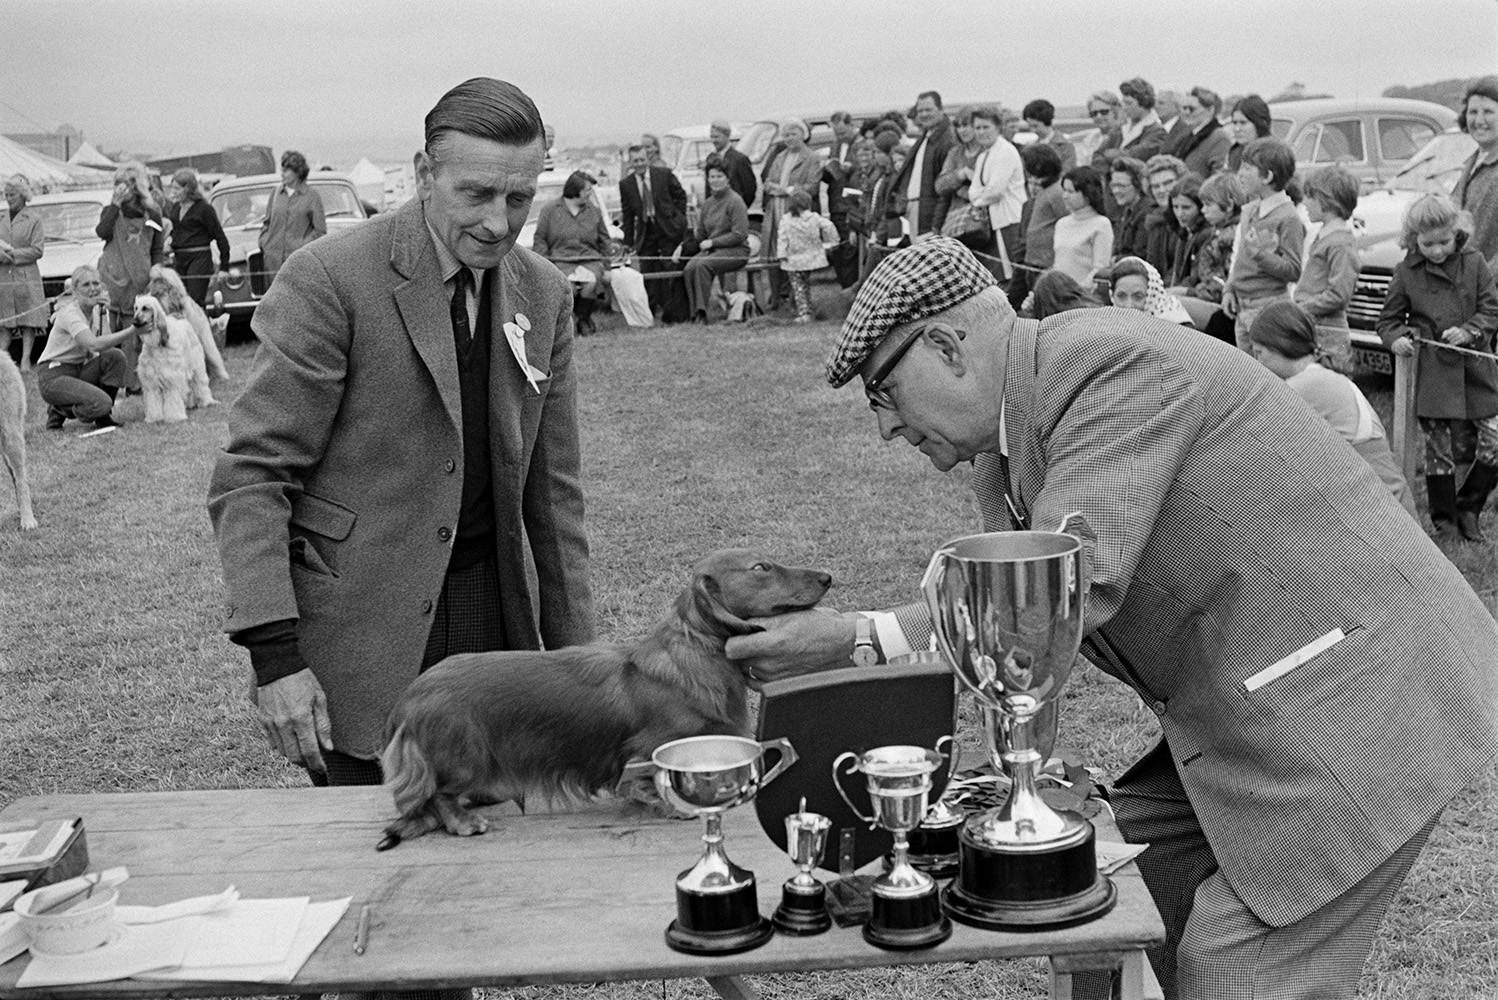 A man judging a Dachshund dog at the North Devon Show at Instow. Another man is watching. The dog is on a table with trophies. Spectators are watching the competition in the background.